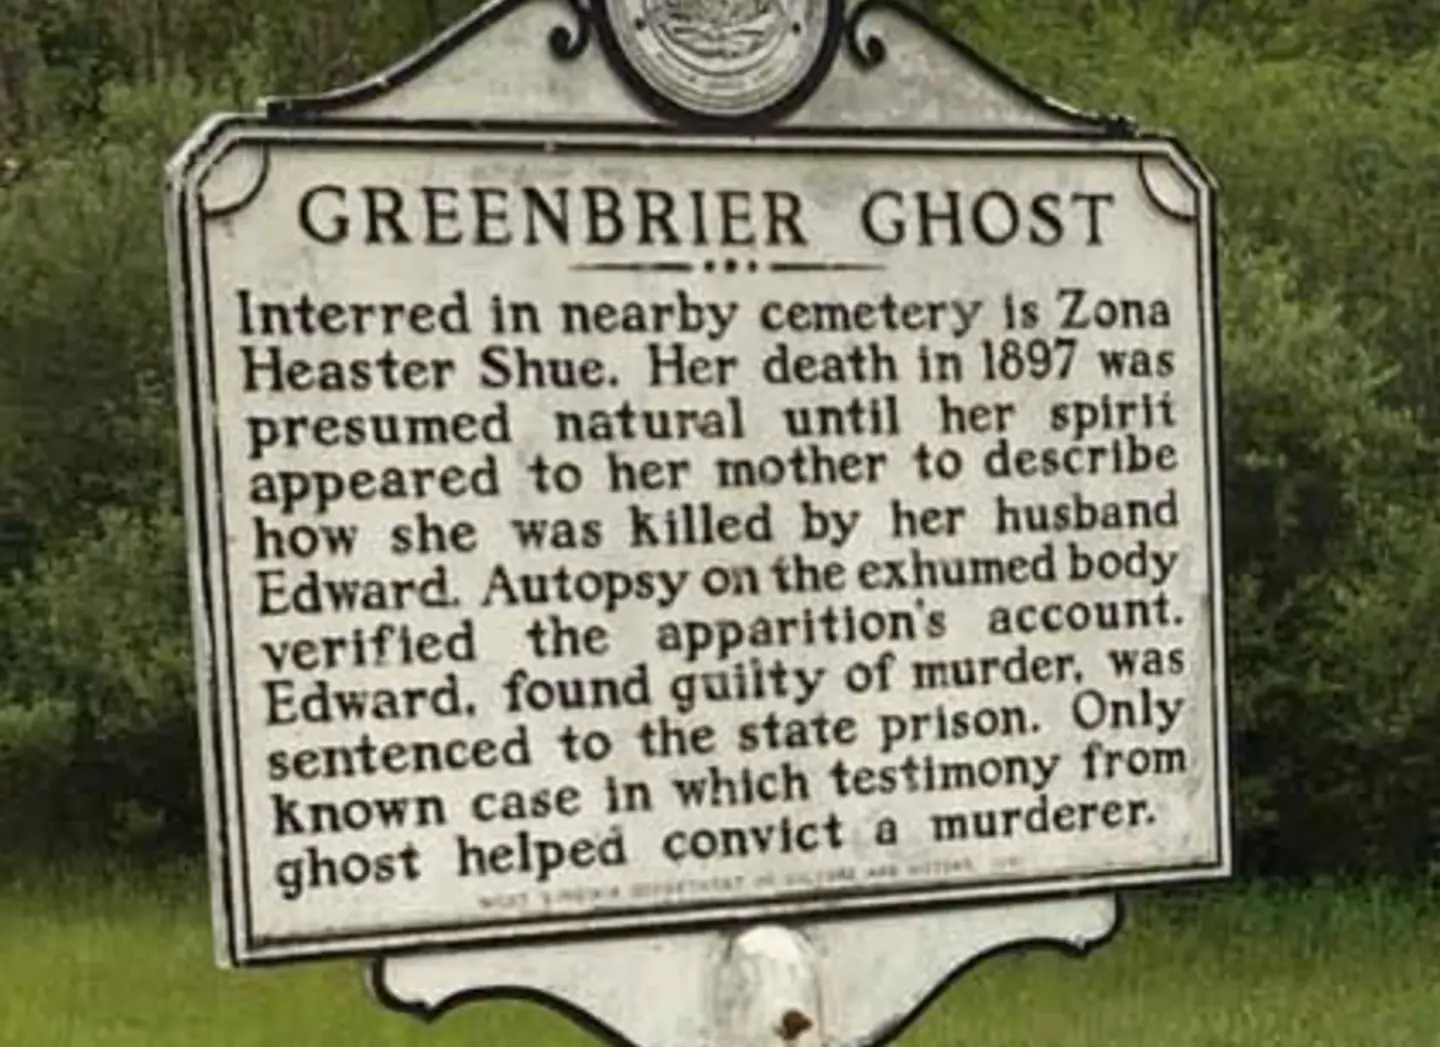 Greenbrier ghost sign.